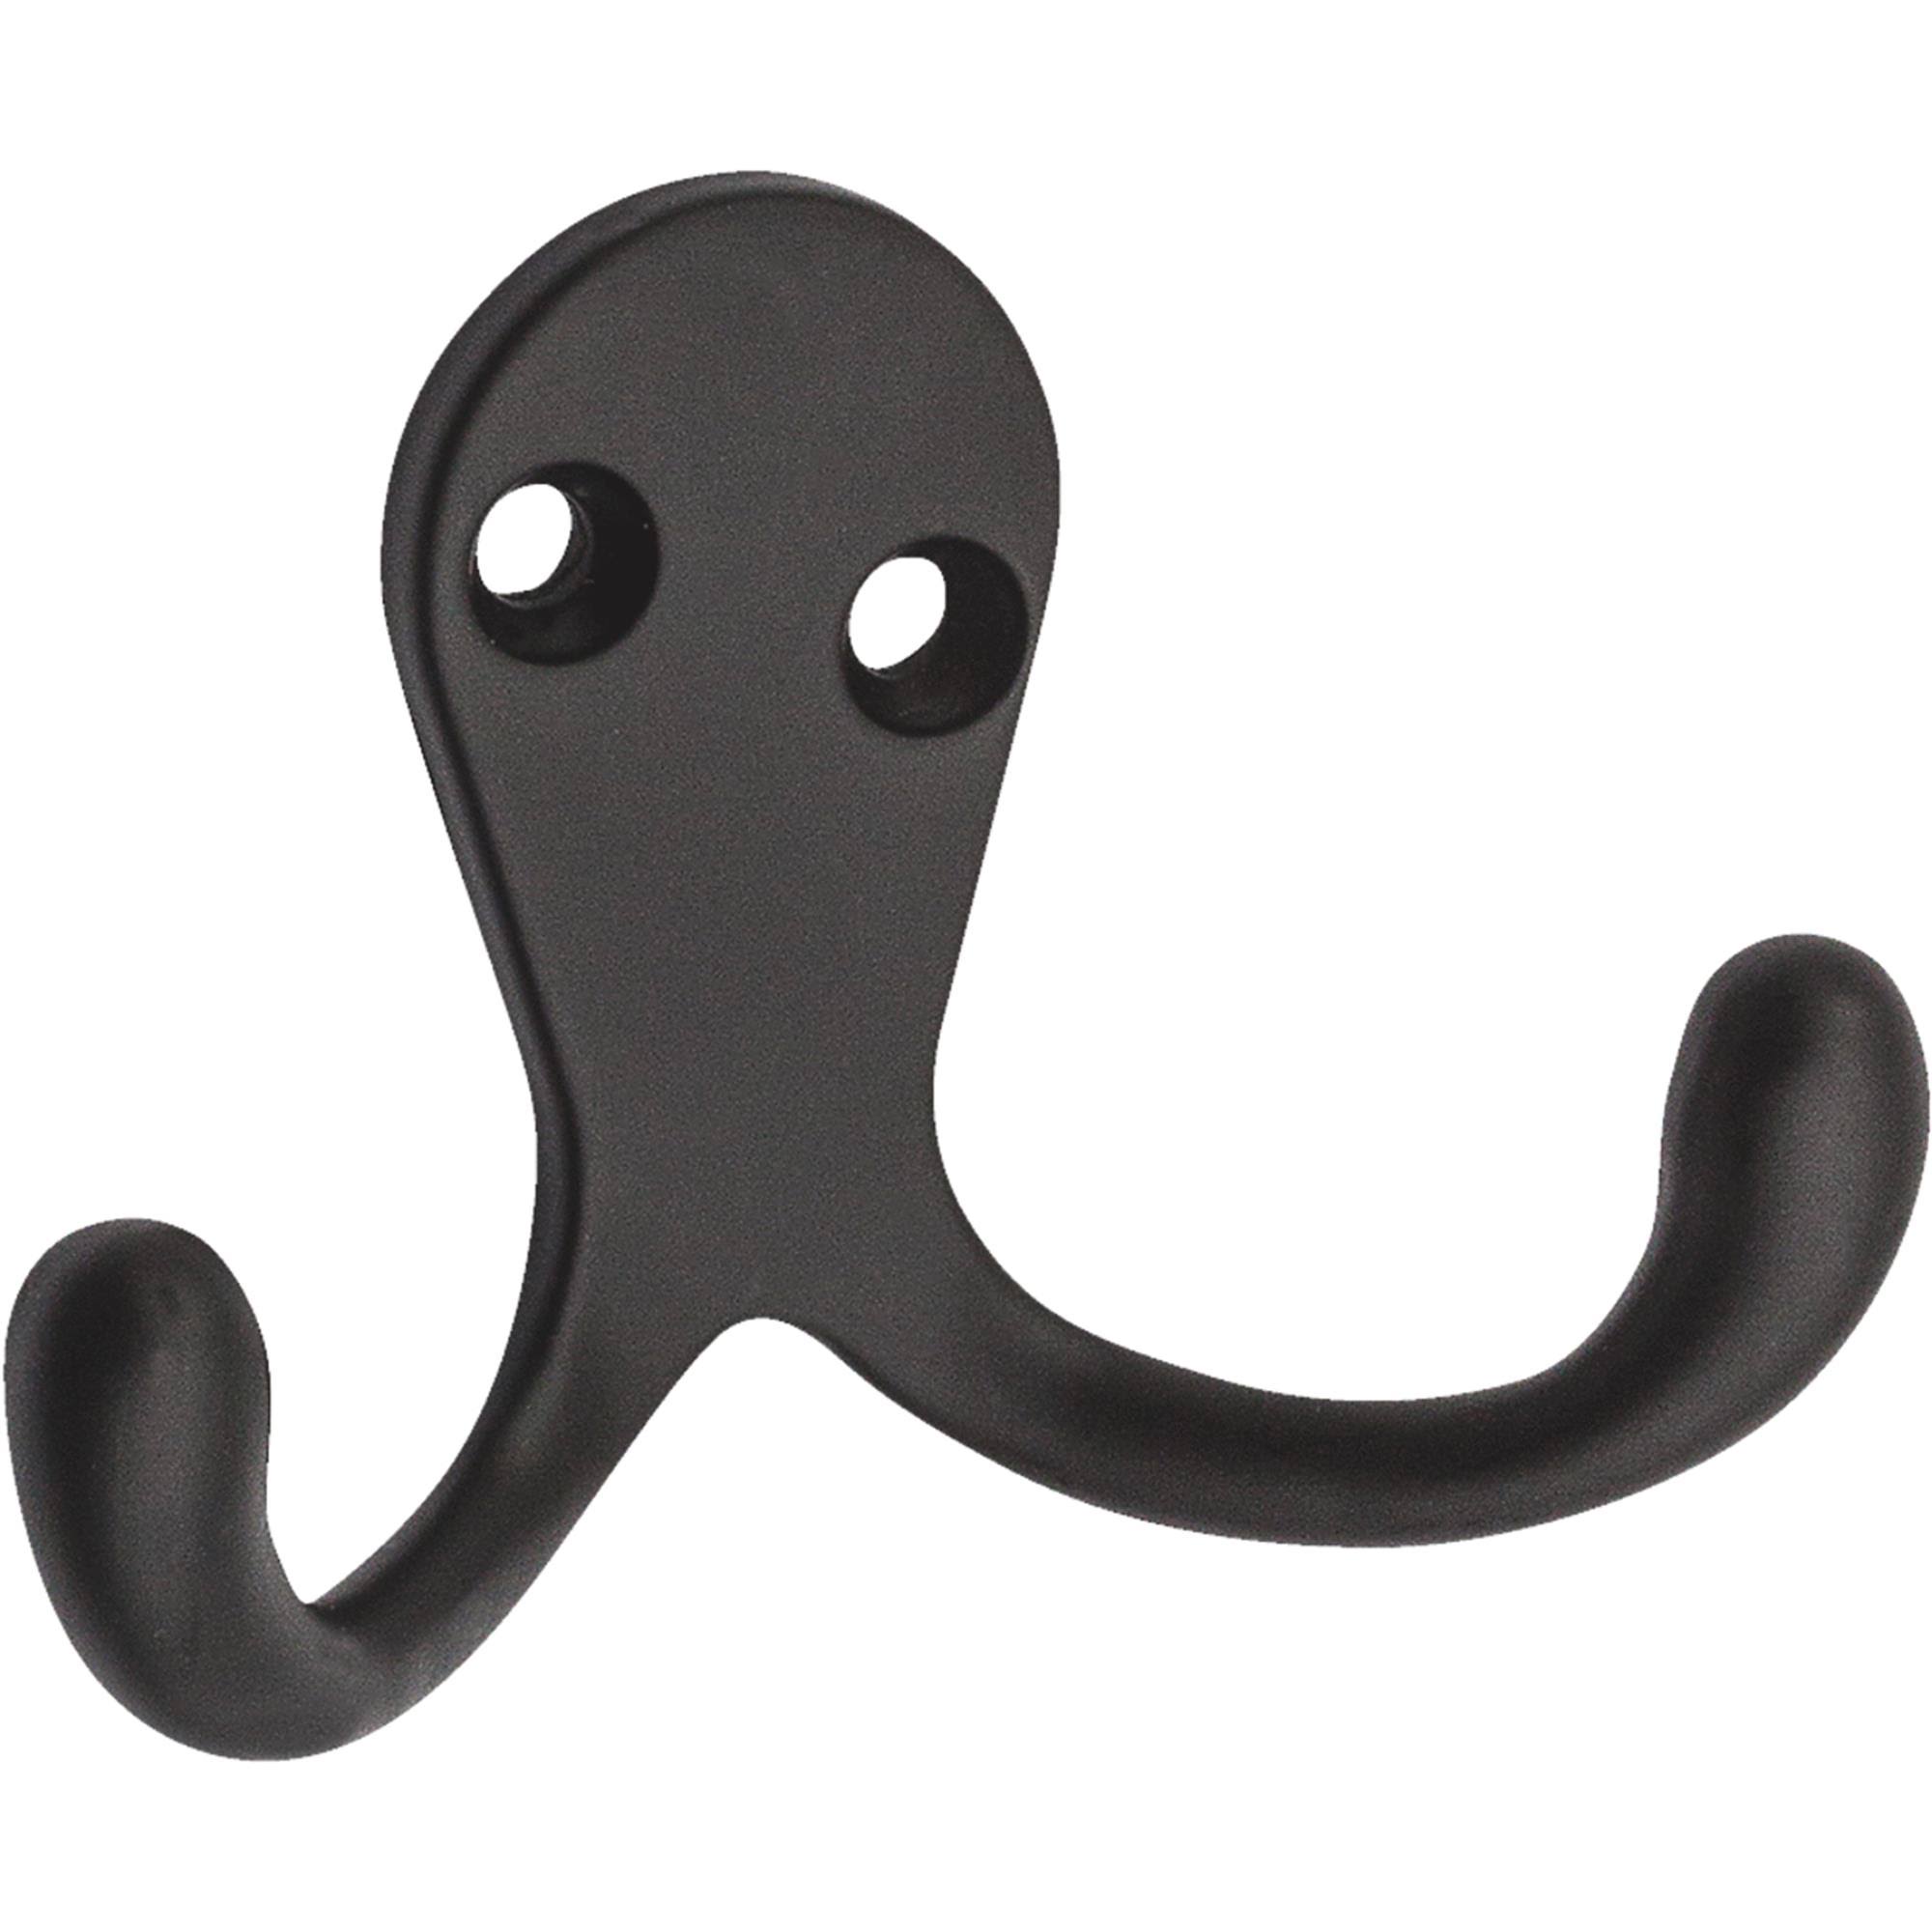 National Hardware N330-829 Double Clothes Hook, Oil Rubbed Bronze, 2-Pack